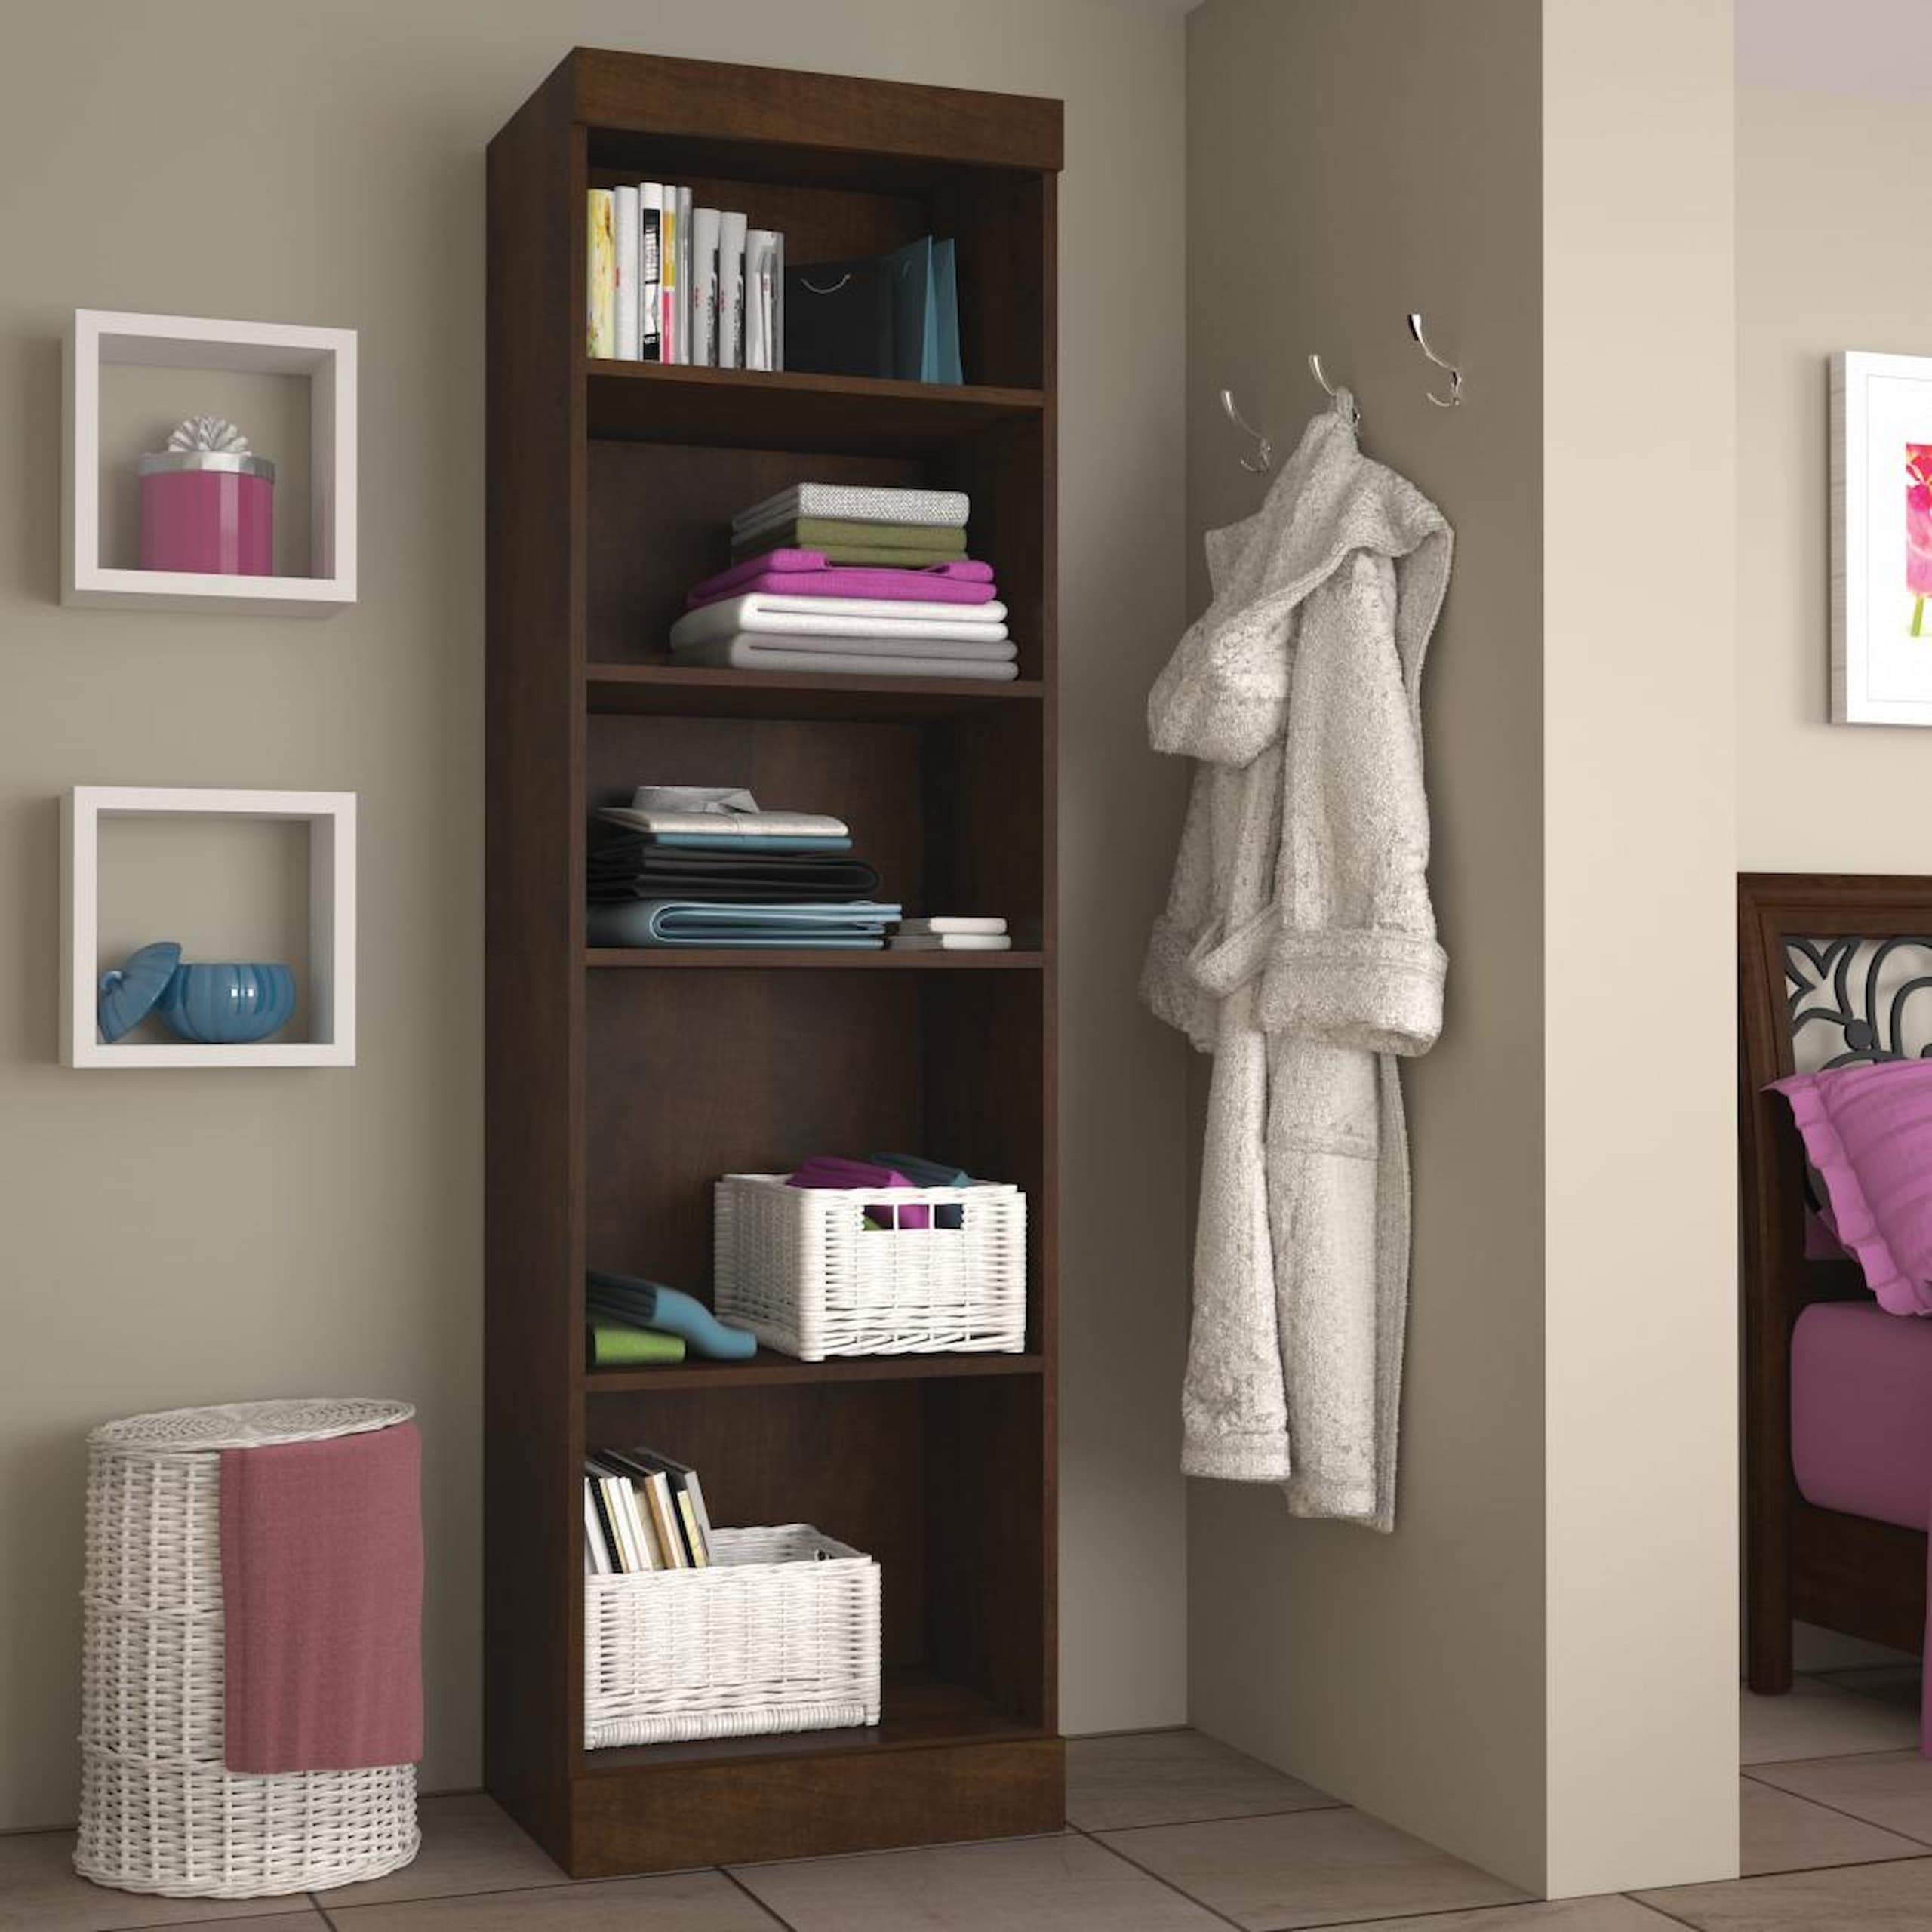 Compact storage solution for good organization